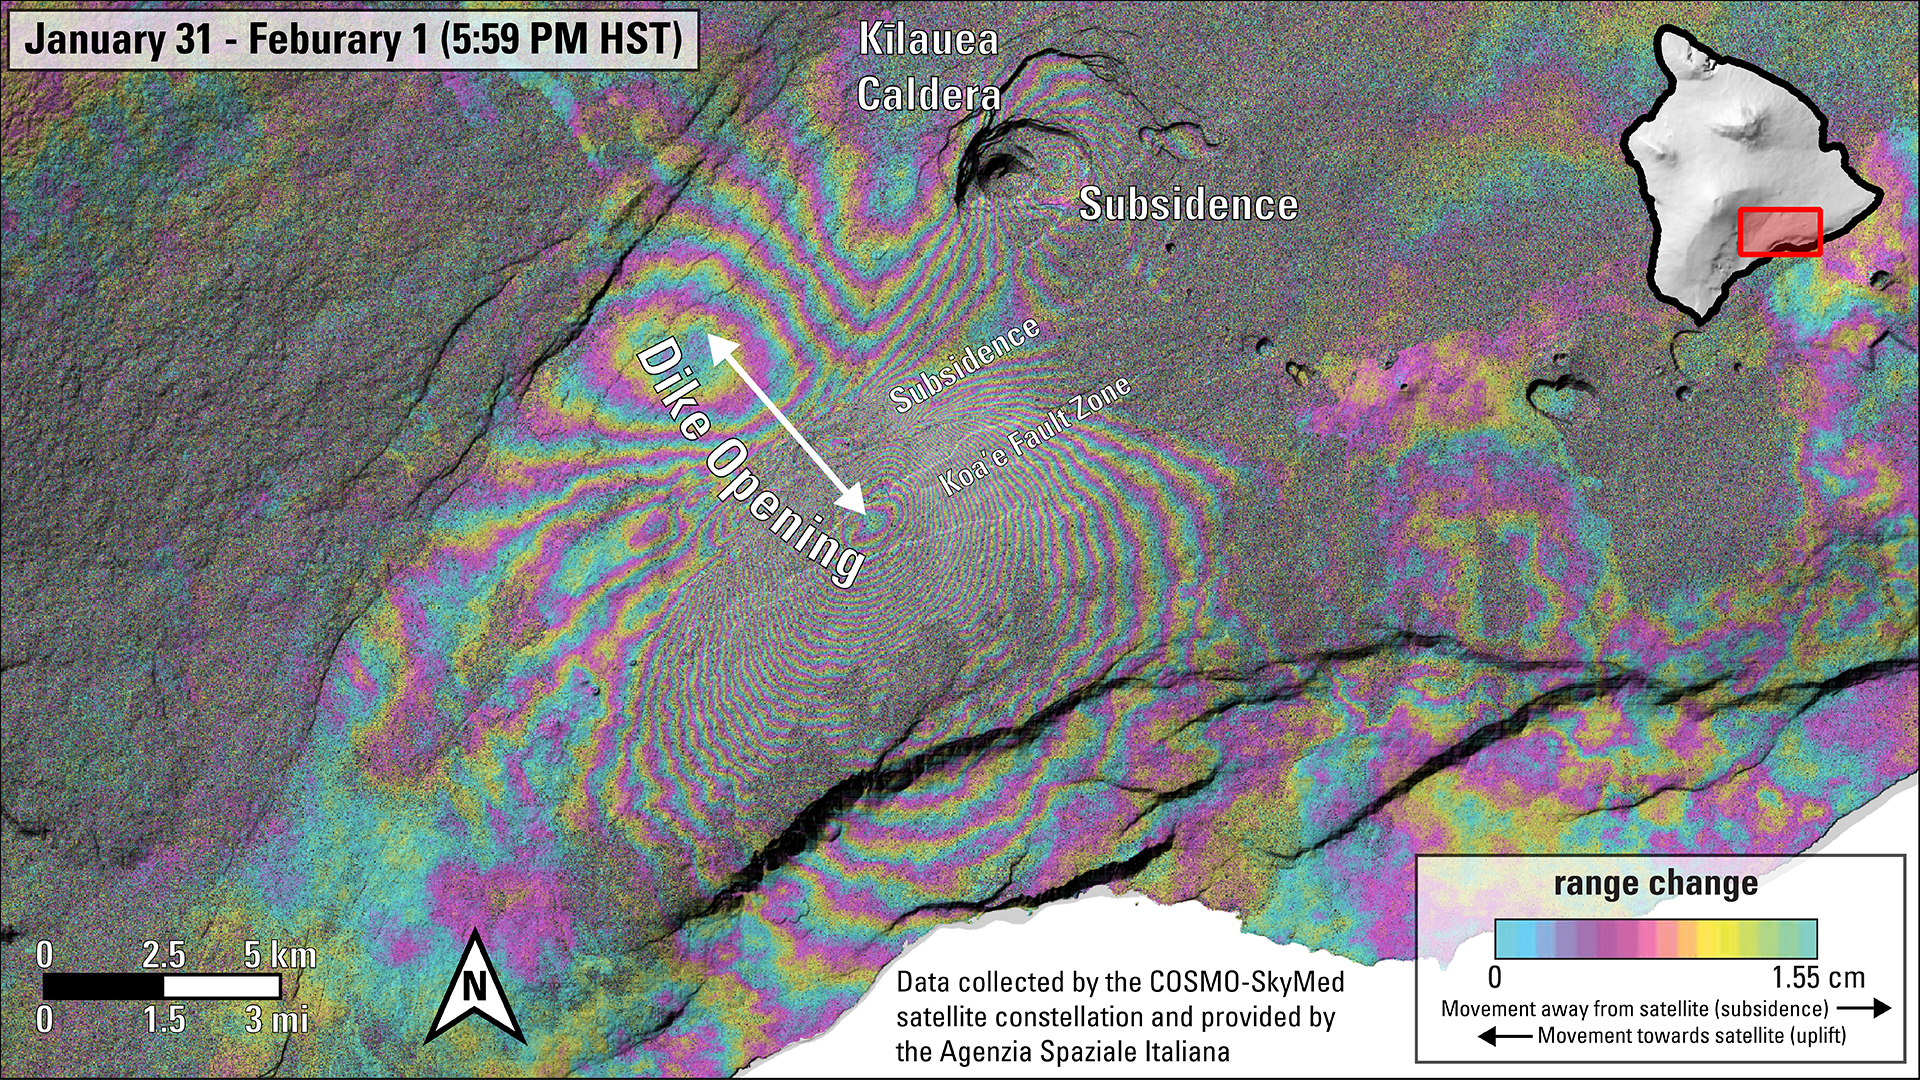 COSMO-SkyMed images to monitor volcanic activities in Hawaii